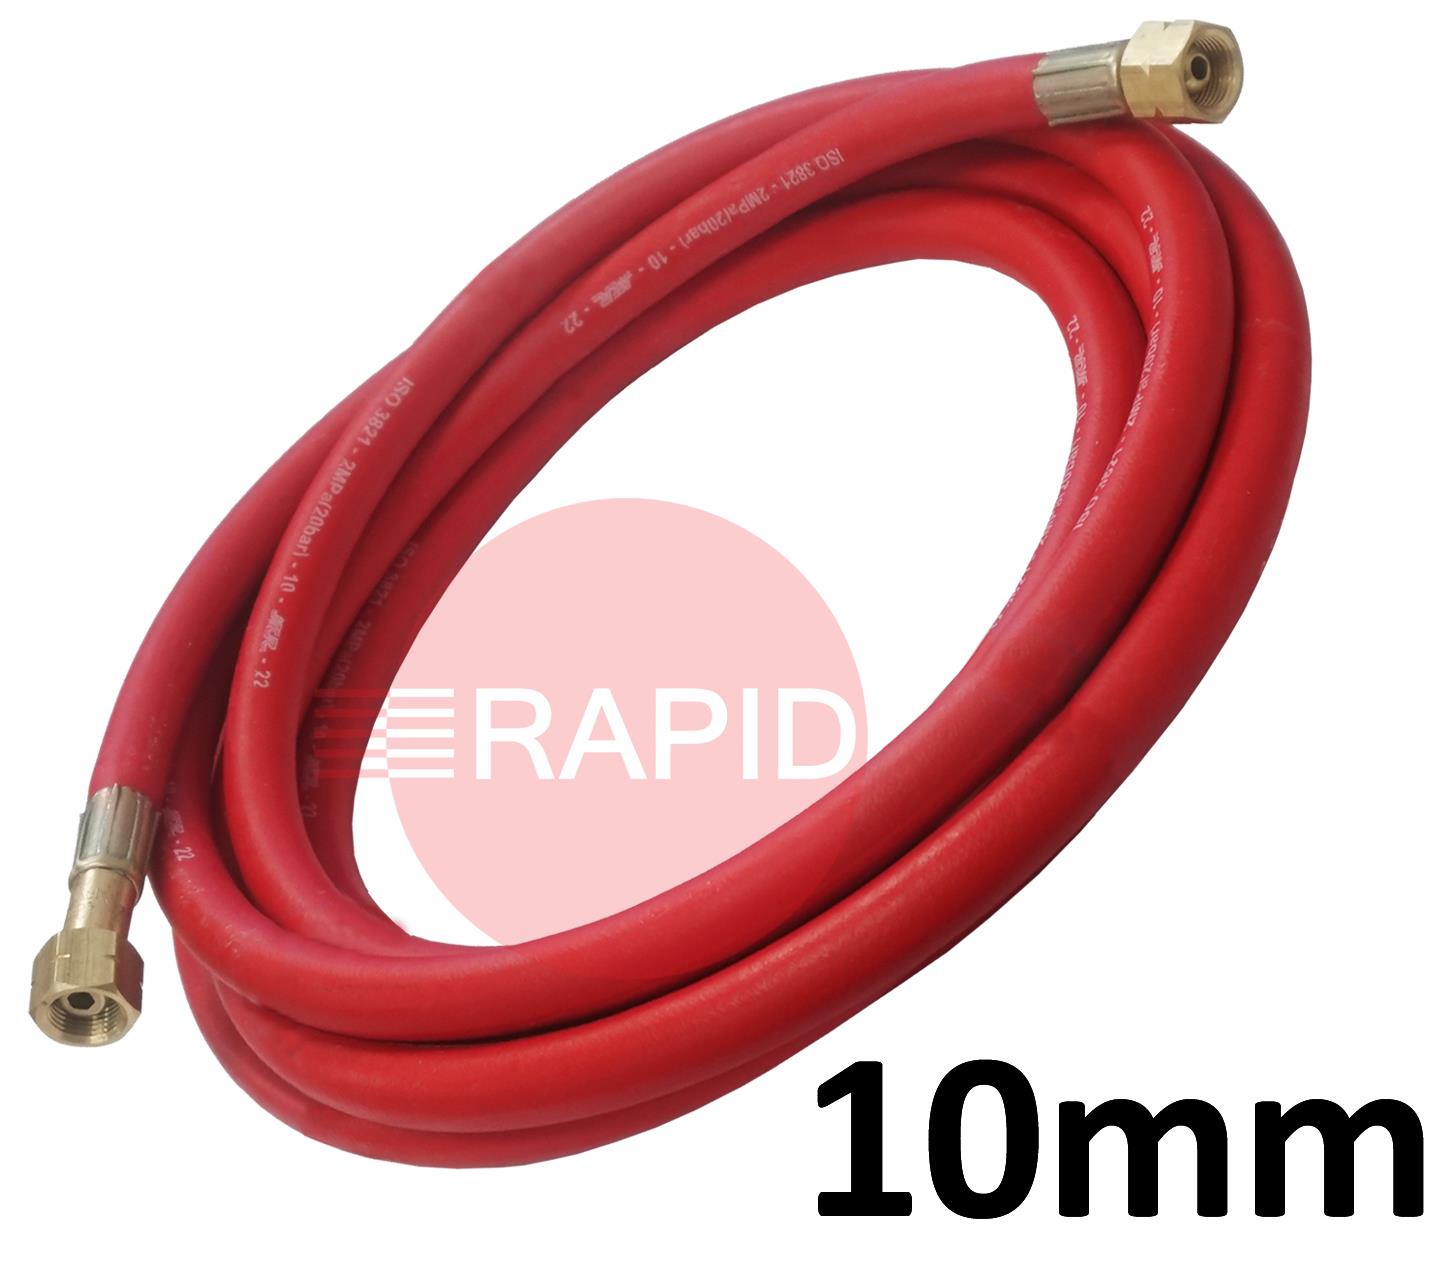 ACYHOSE10MM  Fitted Acetylene Hose. 10mm Bore. G3/8 Check Valve & G3/8 Regulator Connection